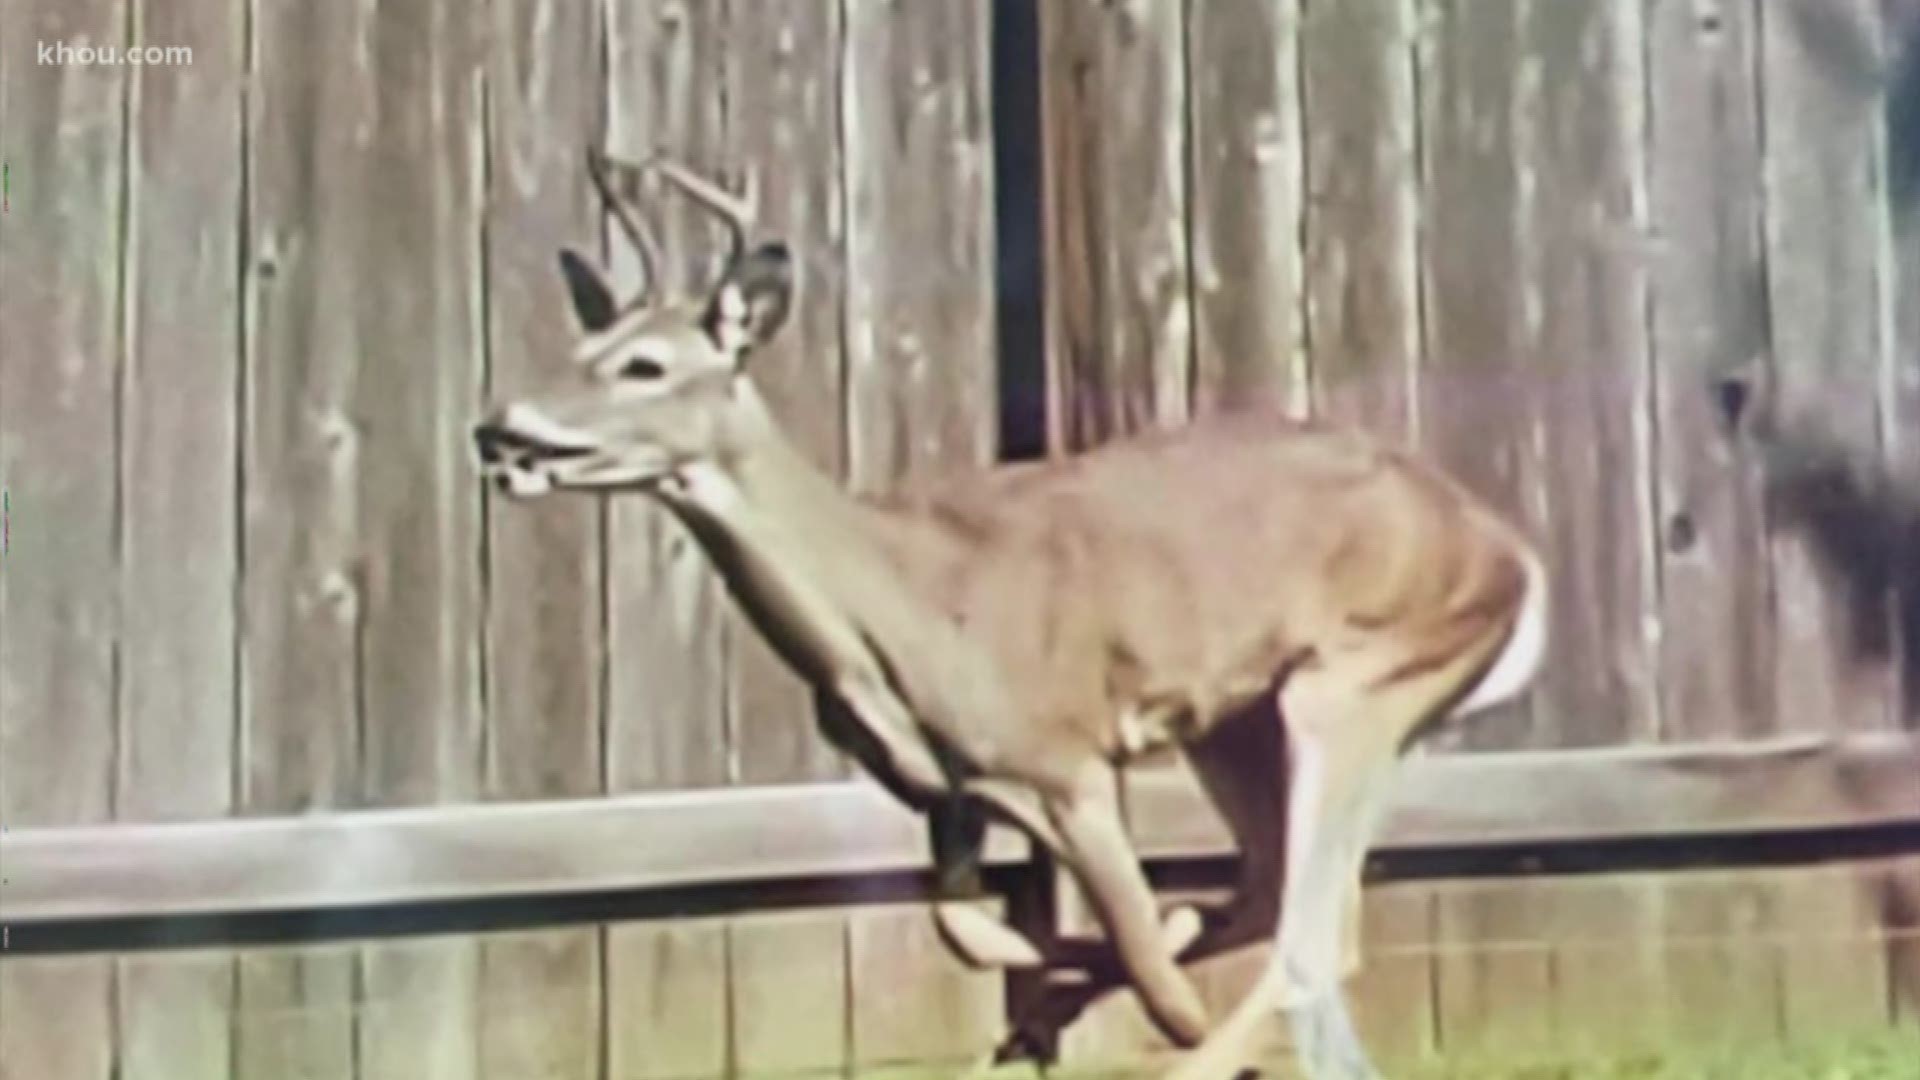 Oh deer! A Katy homeowner is looking for someone to repair a window to his home after a buck busted through it. The buck also set off the home alarm.